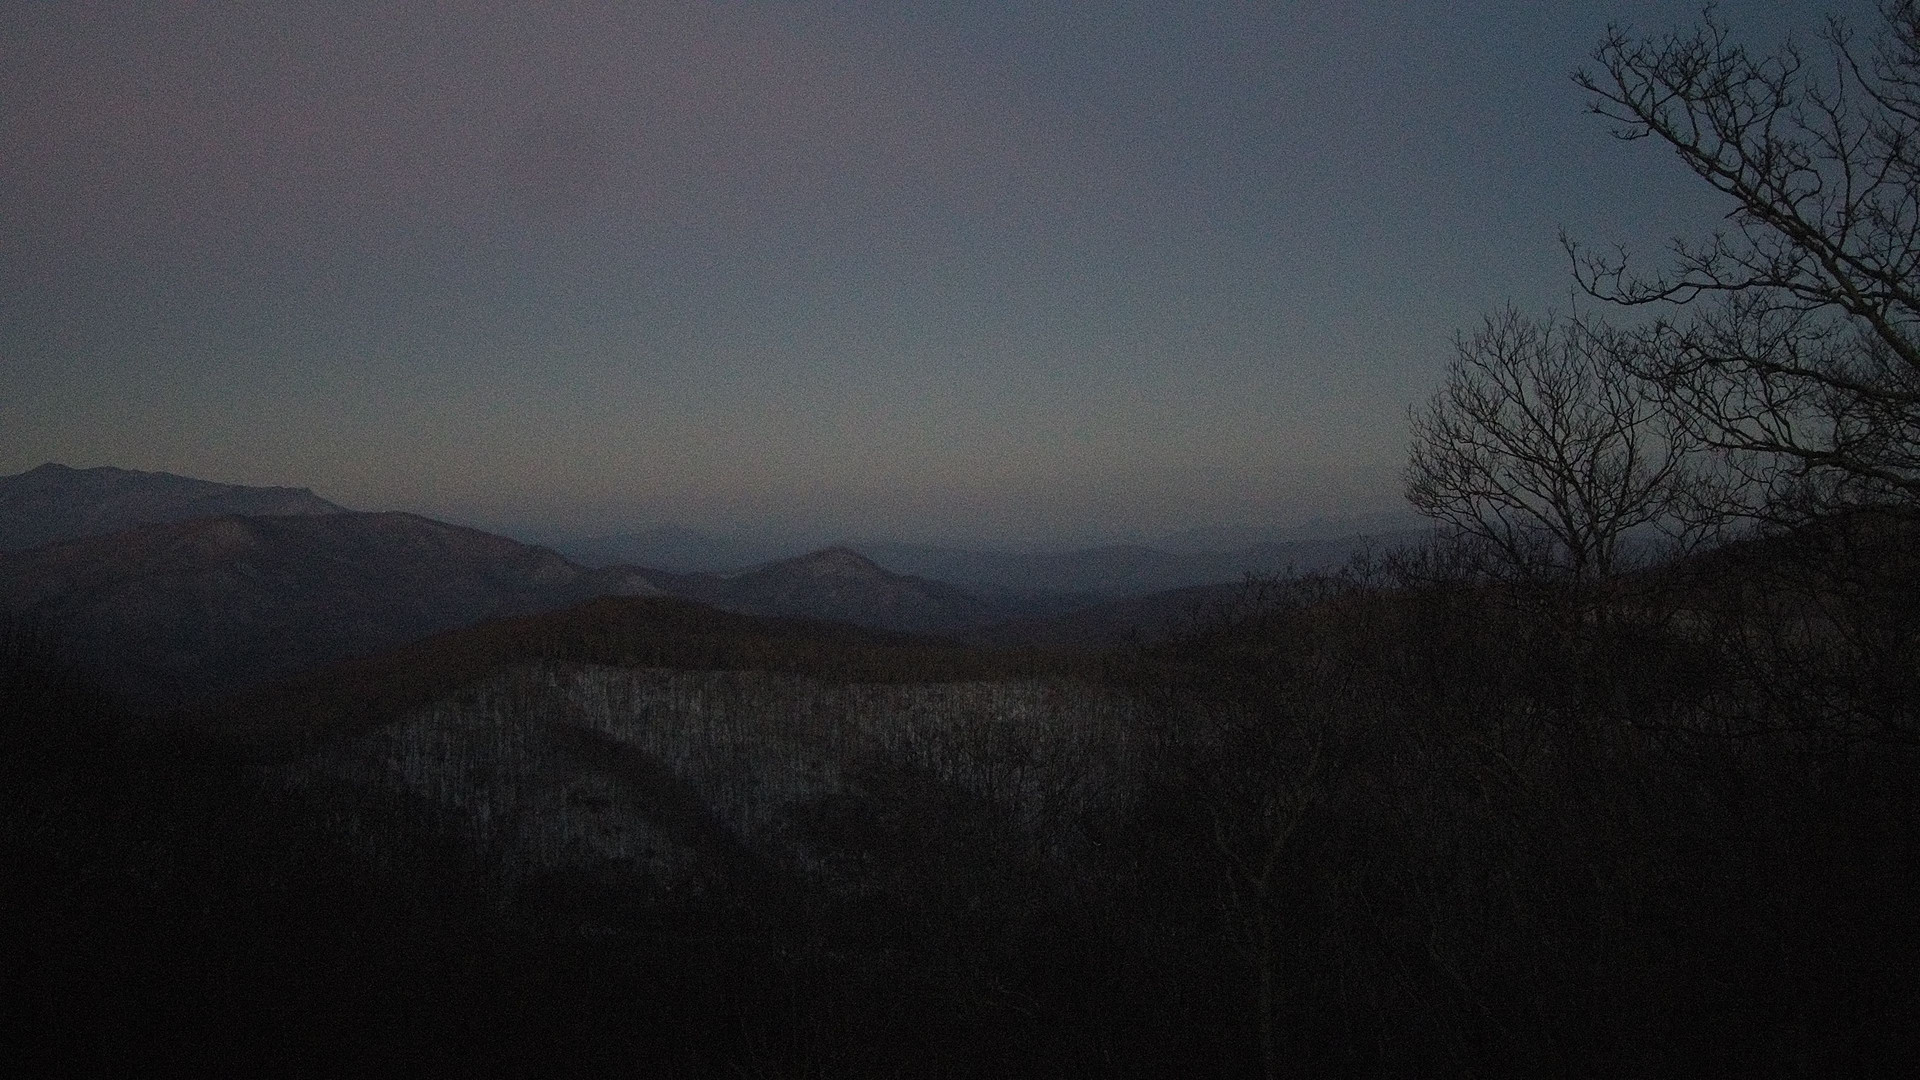 time-lapse frame, January 24 Clear Day at Sterchi webcam